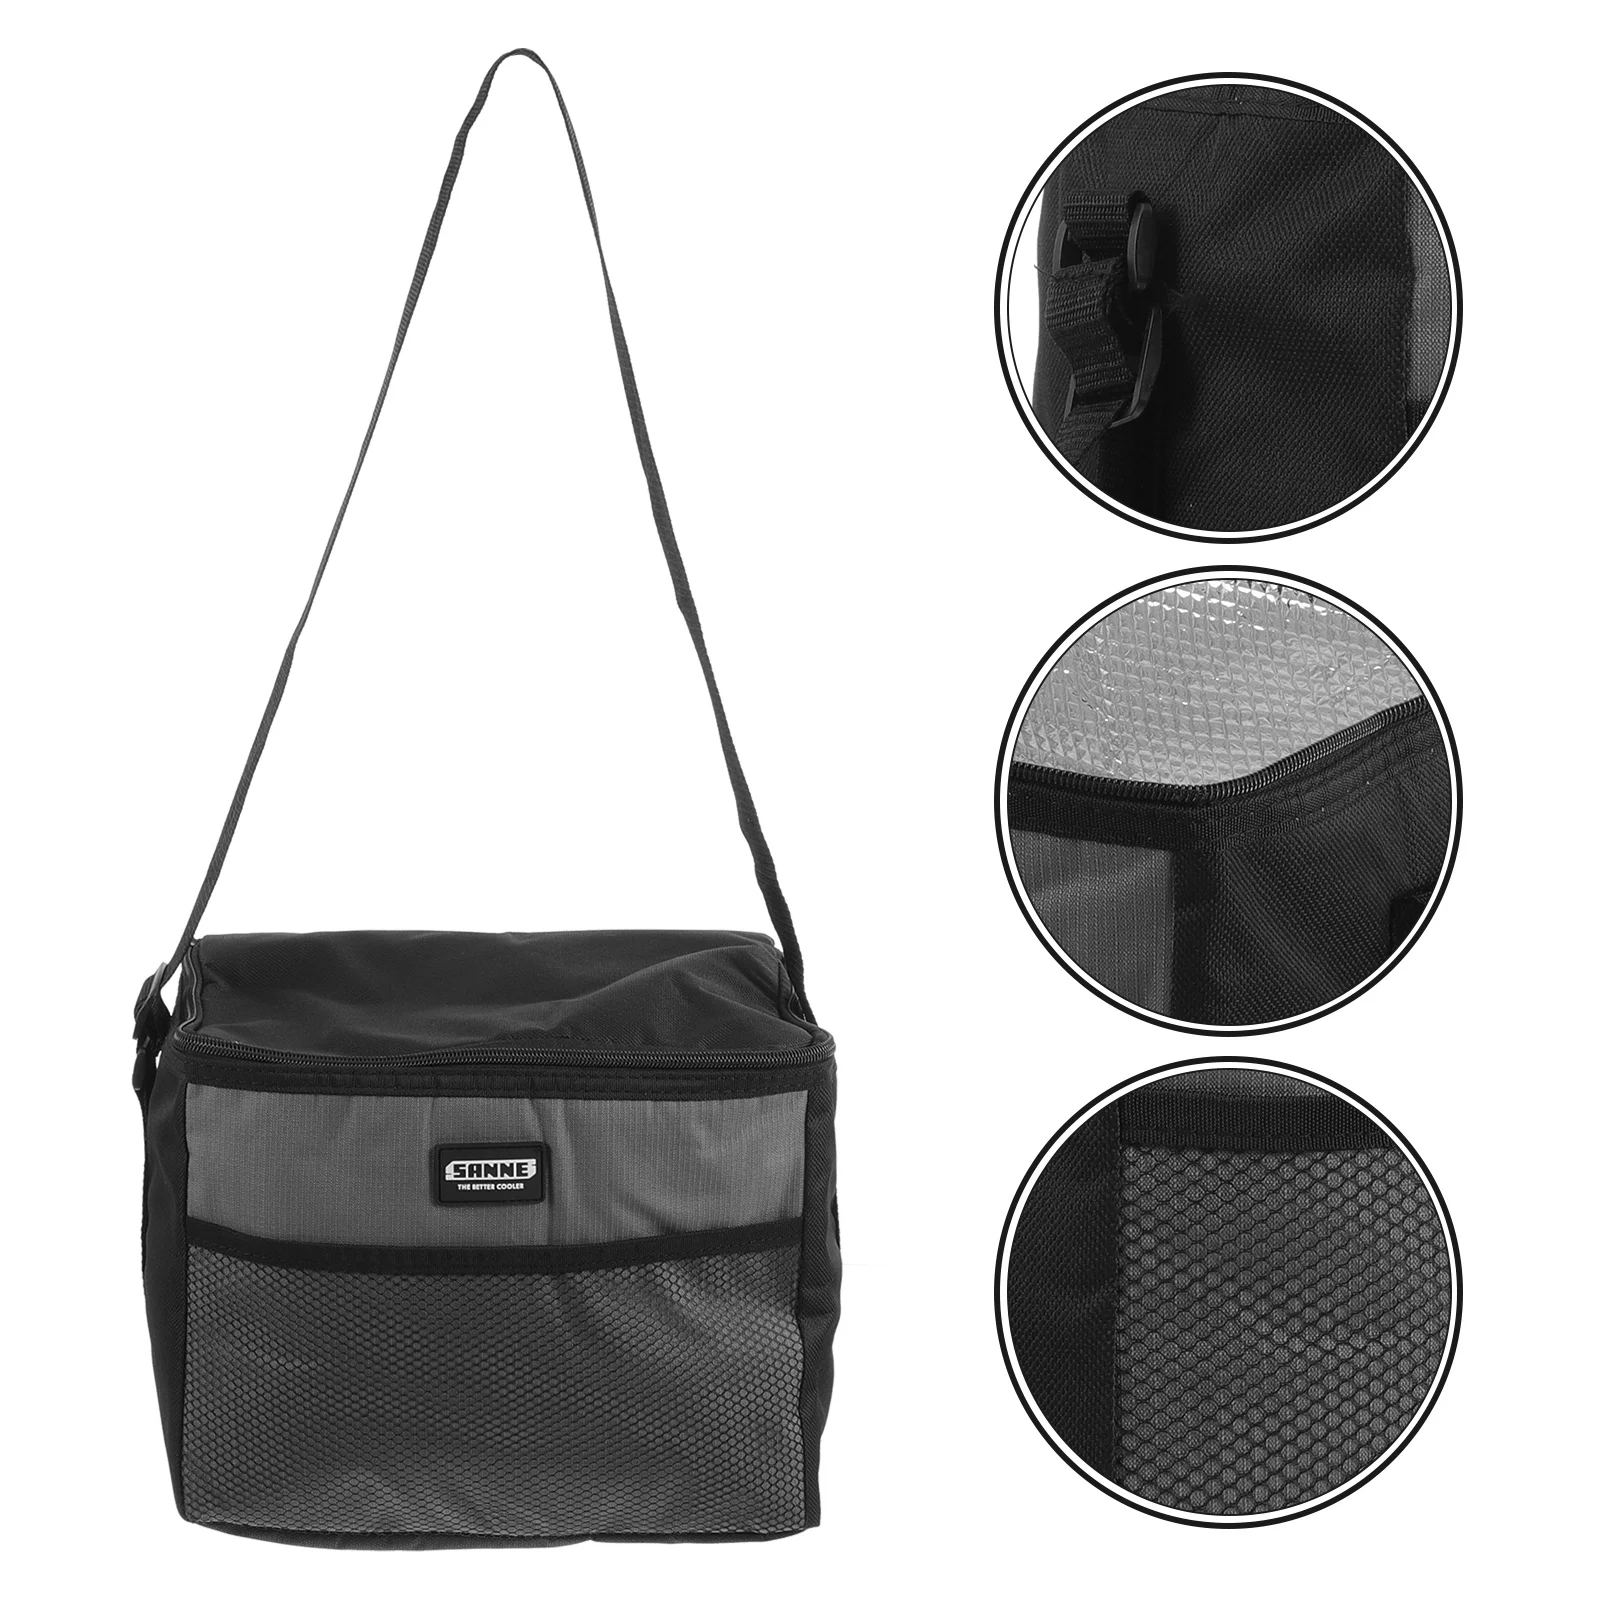 

Lunch Case Insulated Picnic Carryon Oxford Carrying Ice Cooler Food Thermal Outdoor Carry Handbag Bento Lunchbags Cloth